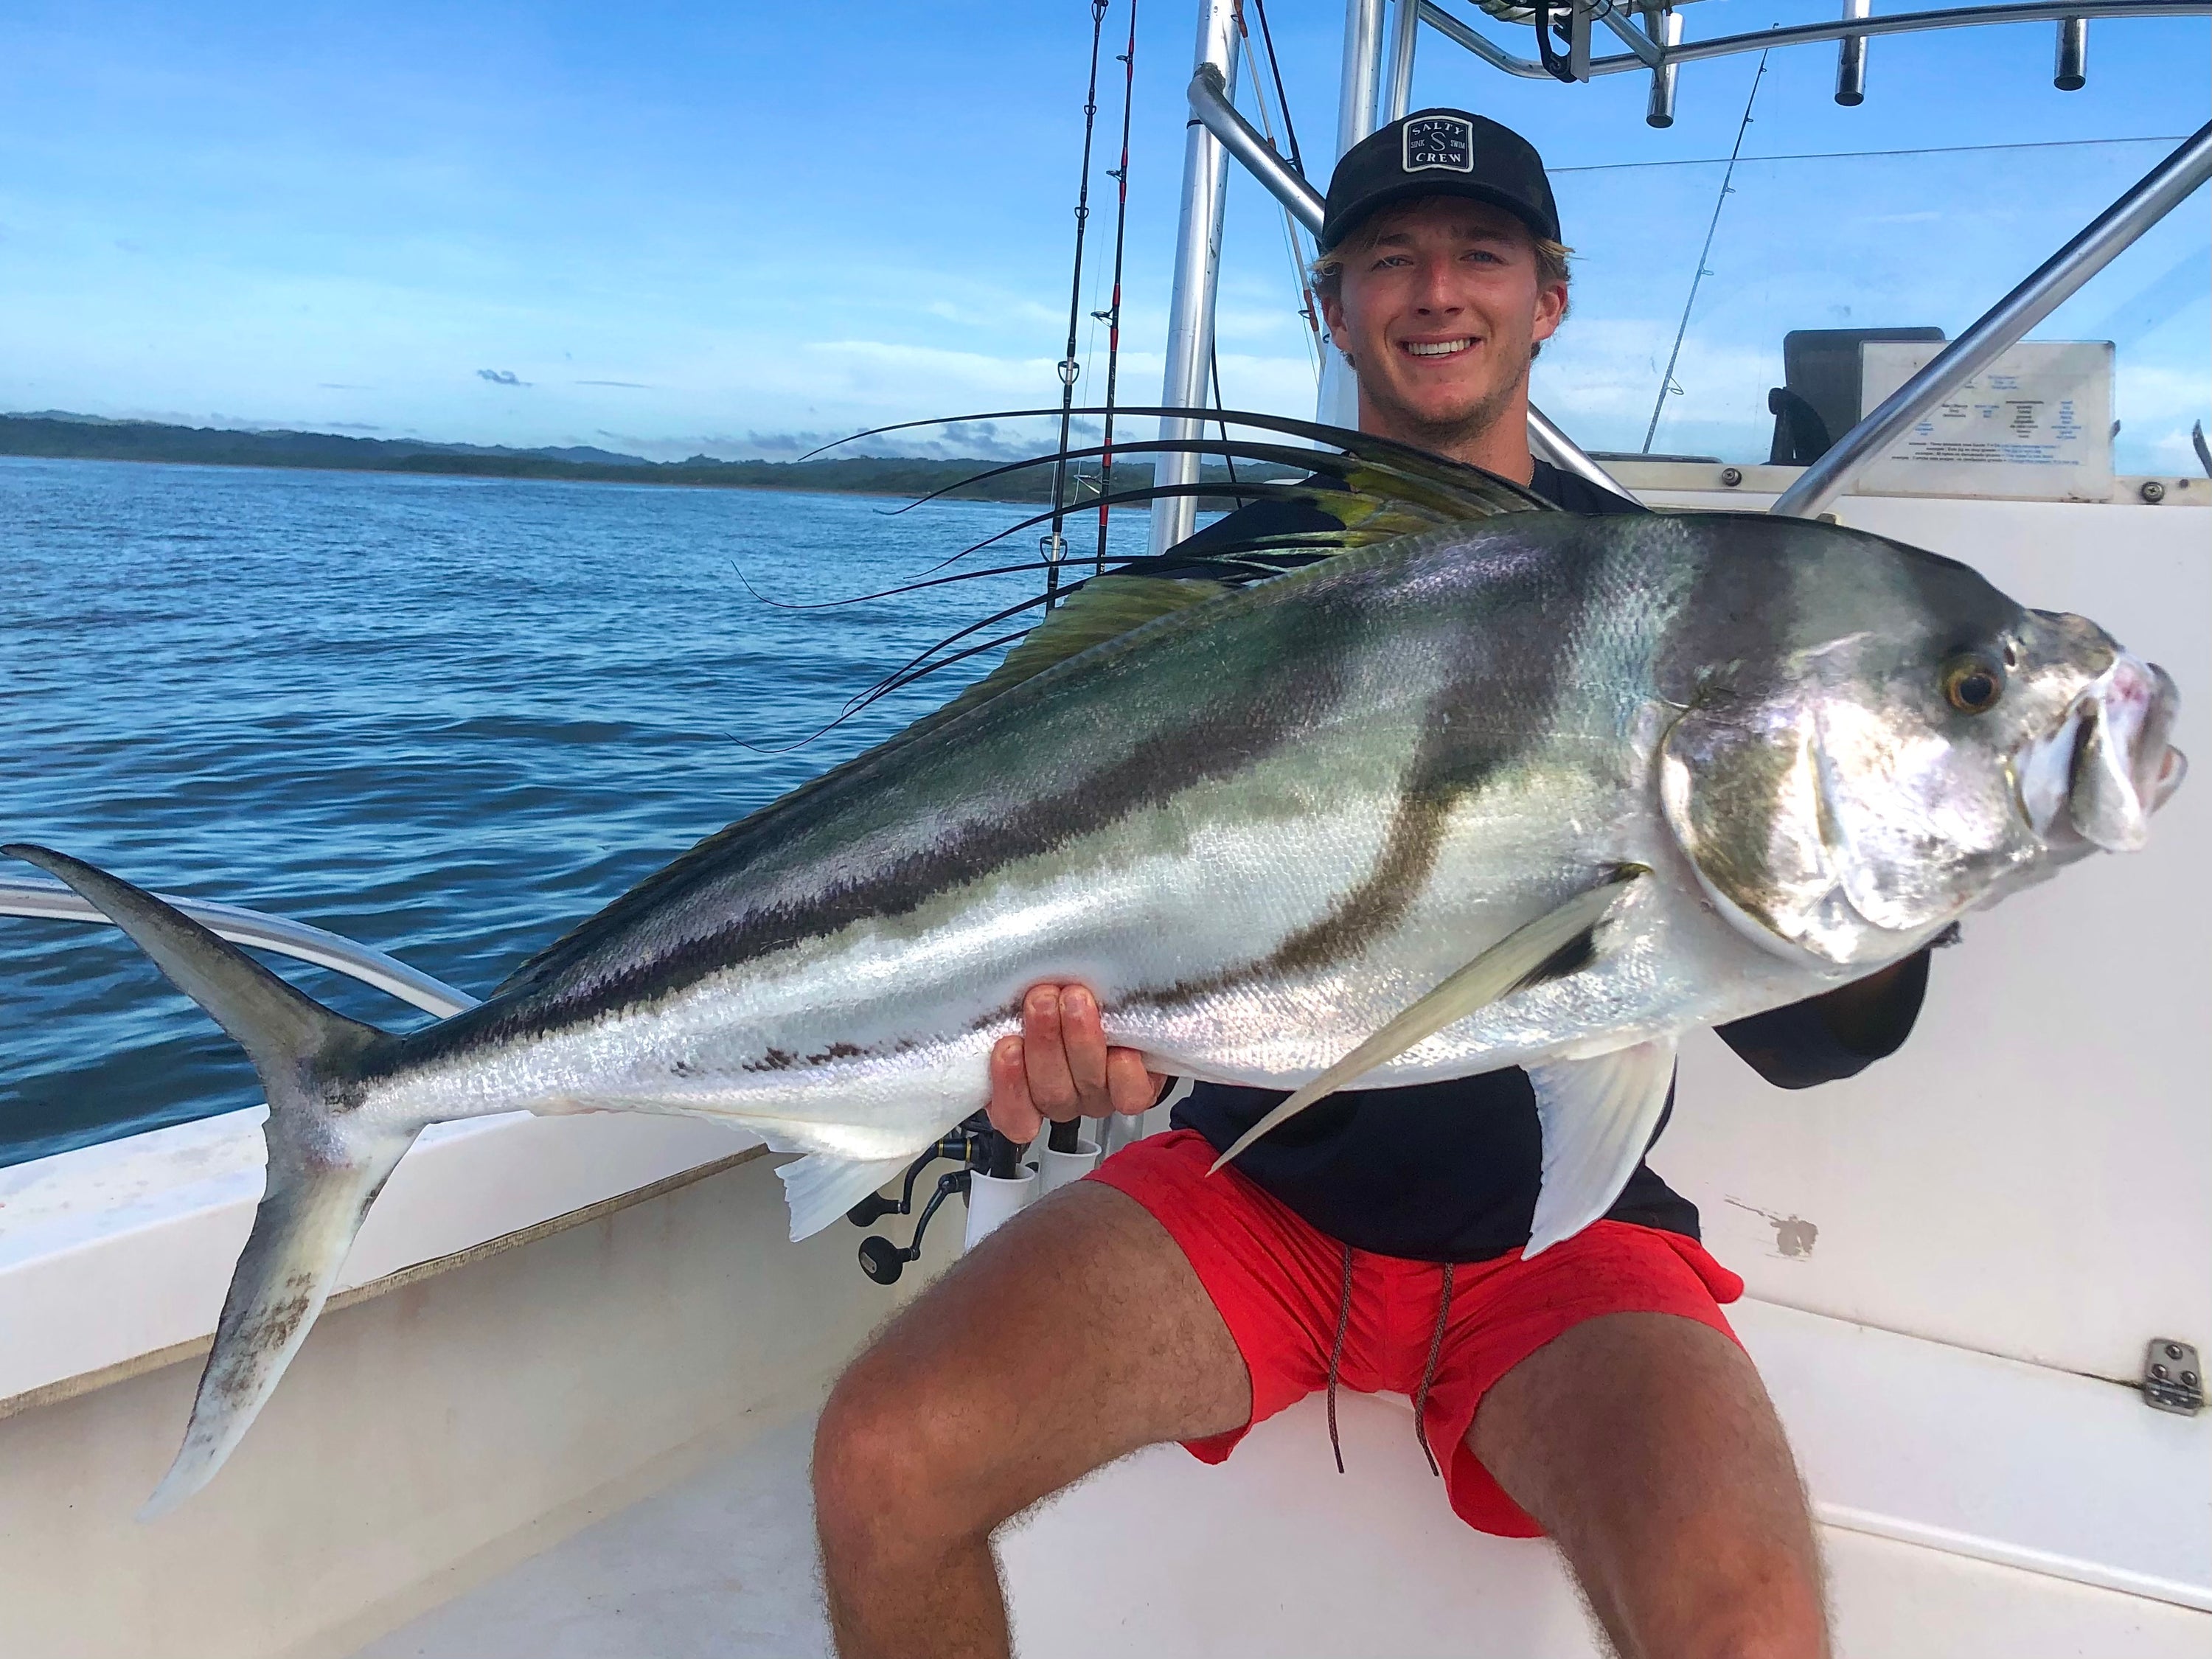 Kieren with a Roosterfish caught popping in Panama